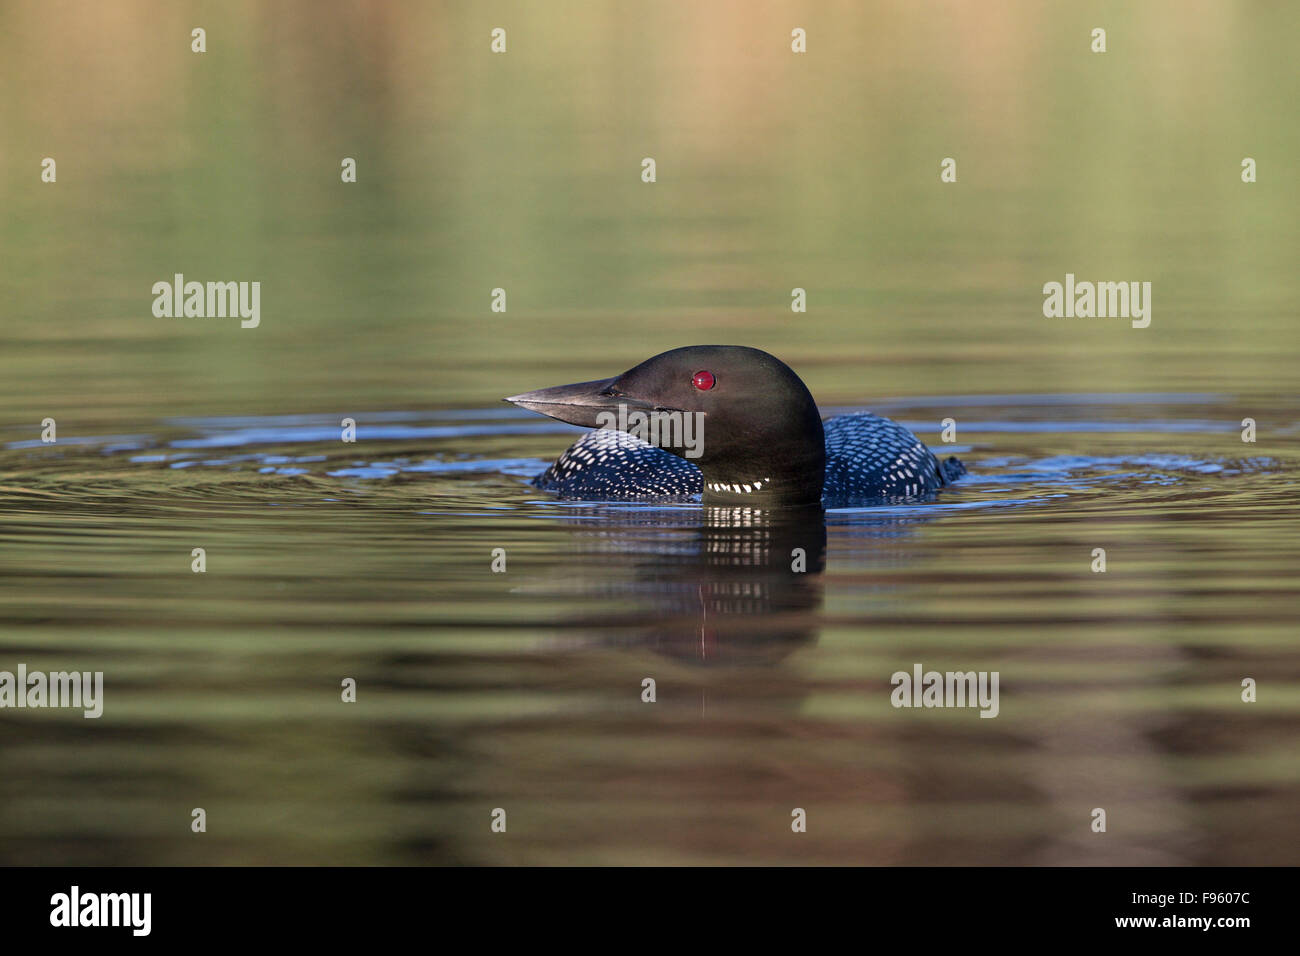 Common loon (Gavia immer), adult swimming low in the water, Lac Le Jeune, British Columbia. Stock Photo